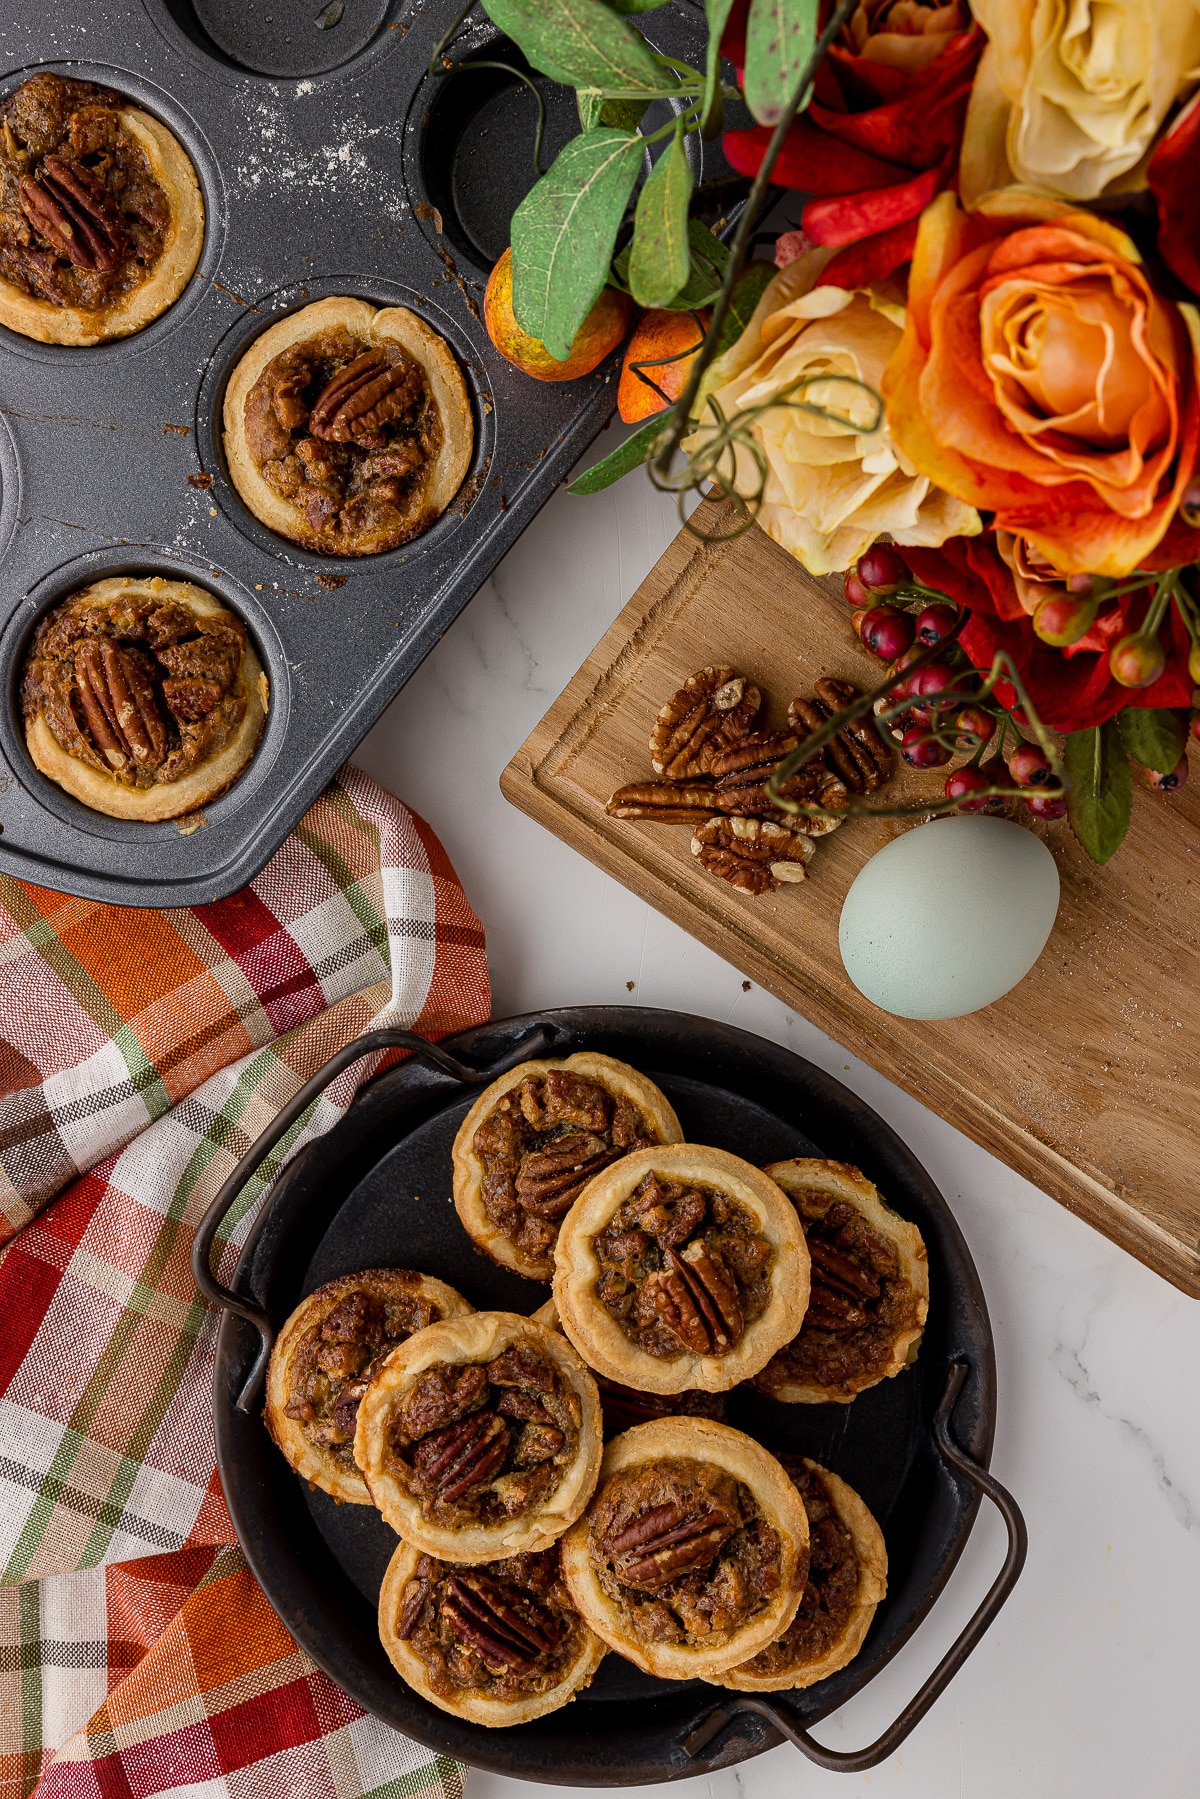 Mini pecan pies stacked on a metal plate with a mini muffin pan, a plaid autumn napkin and a cutting board.